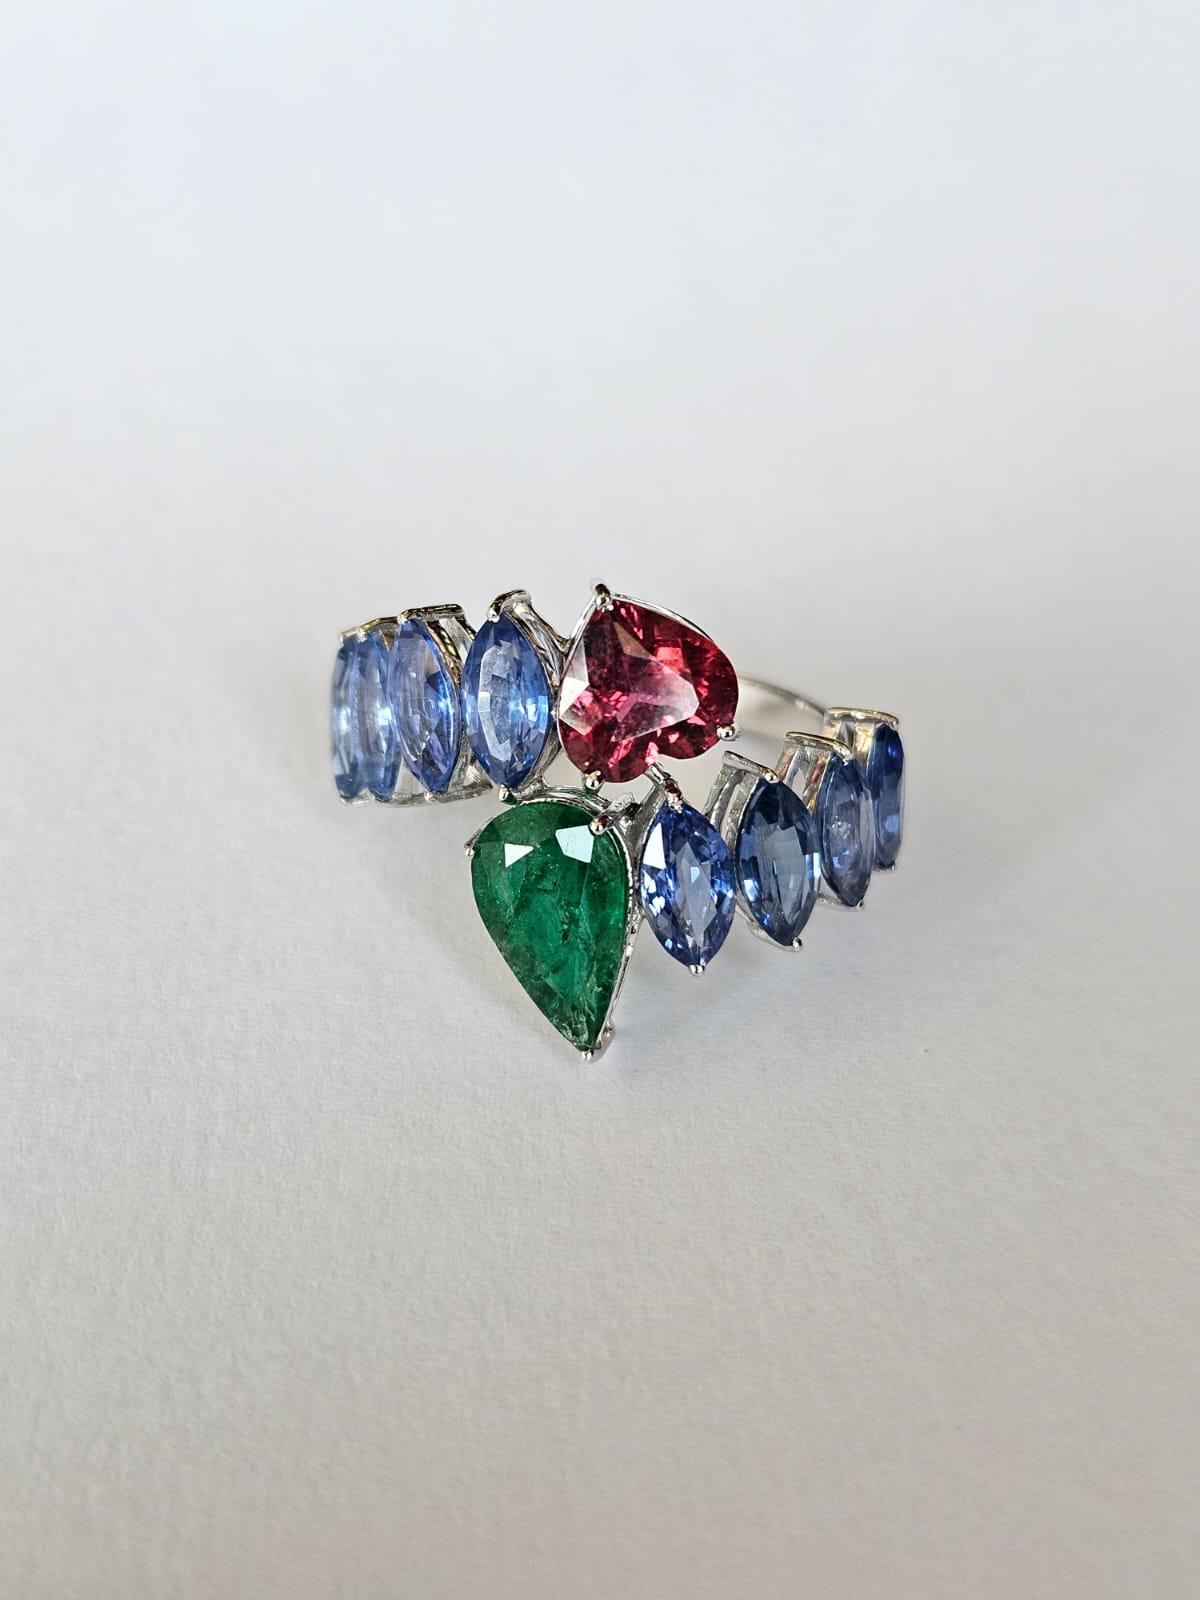 Set in 18K White Gold, 3.44 carats Blue Sapphire, Emerald & Tourmaline Band Ring For Sale 1